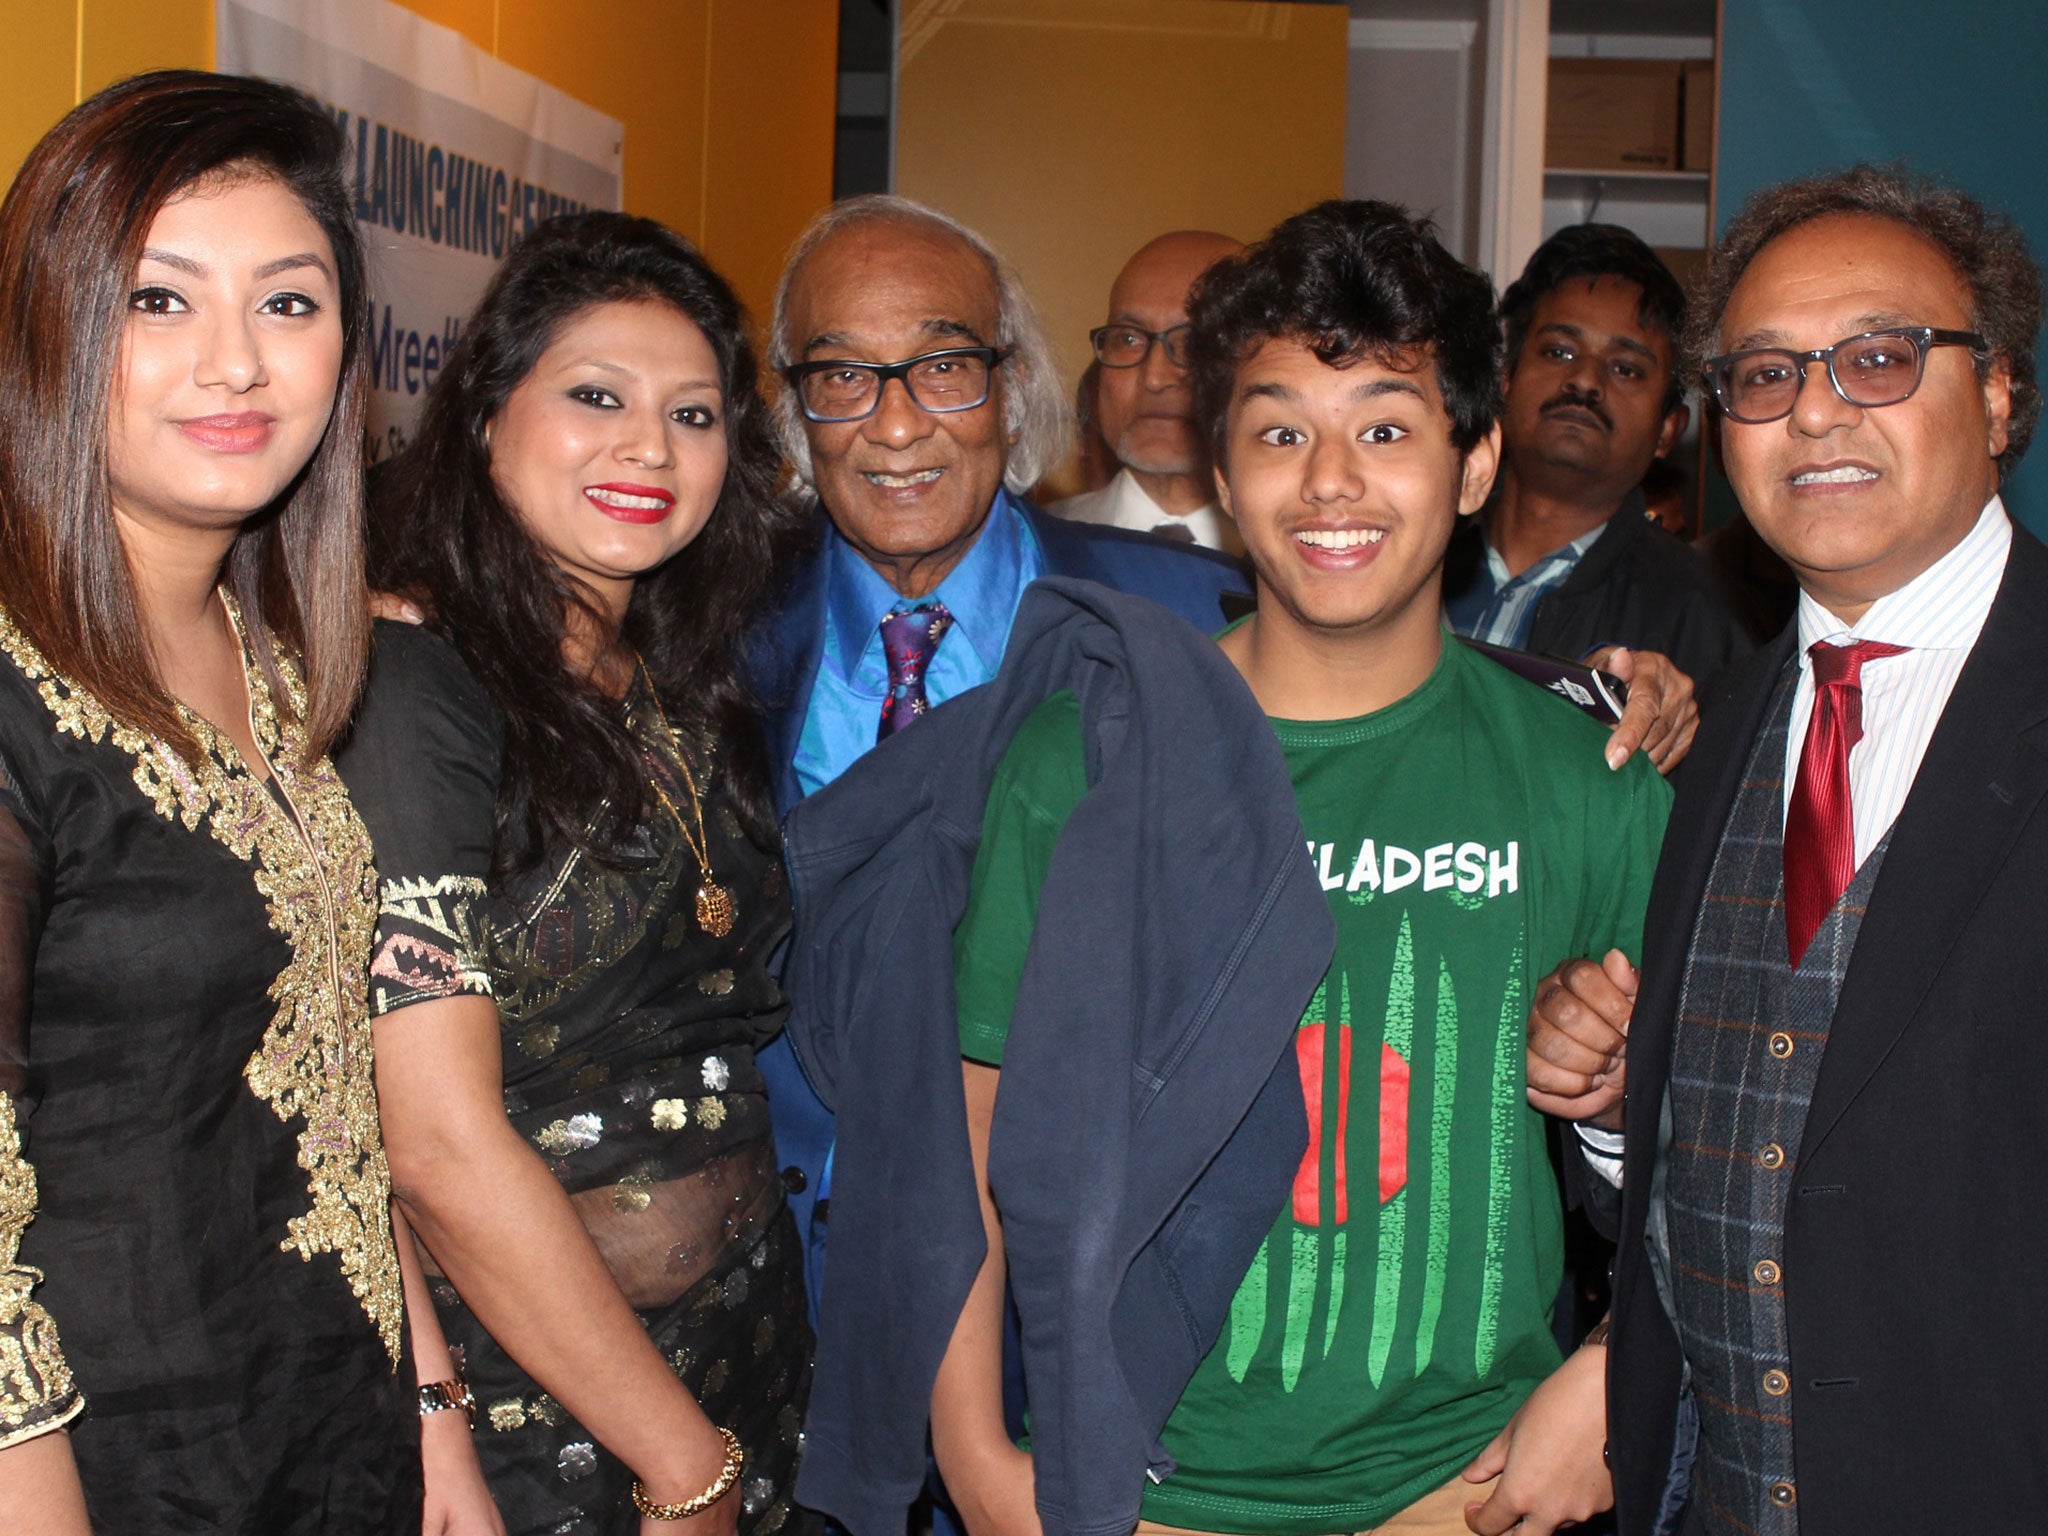 Shafik Rehman (center) pictured in East London last year at his book launch. Also pictured left to right: His granddaughter Prianka, daughter-in-law Bilkis Arzu, grandson Zubeen and son Shumit